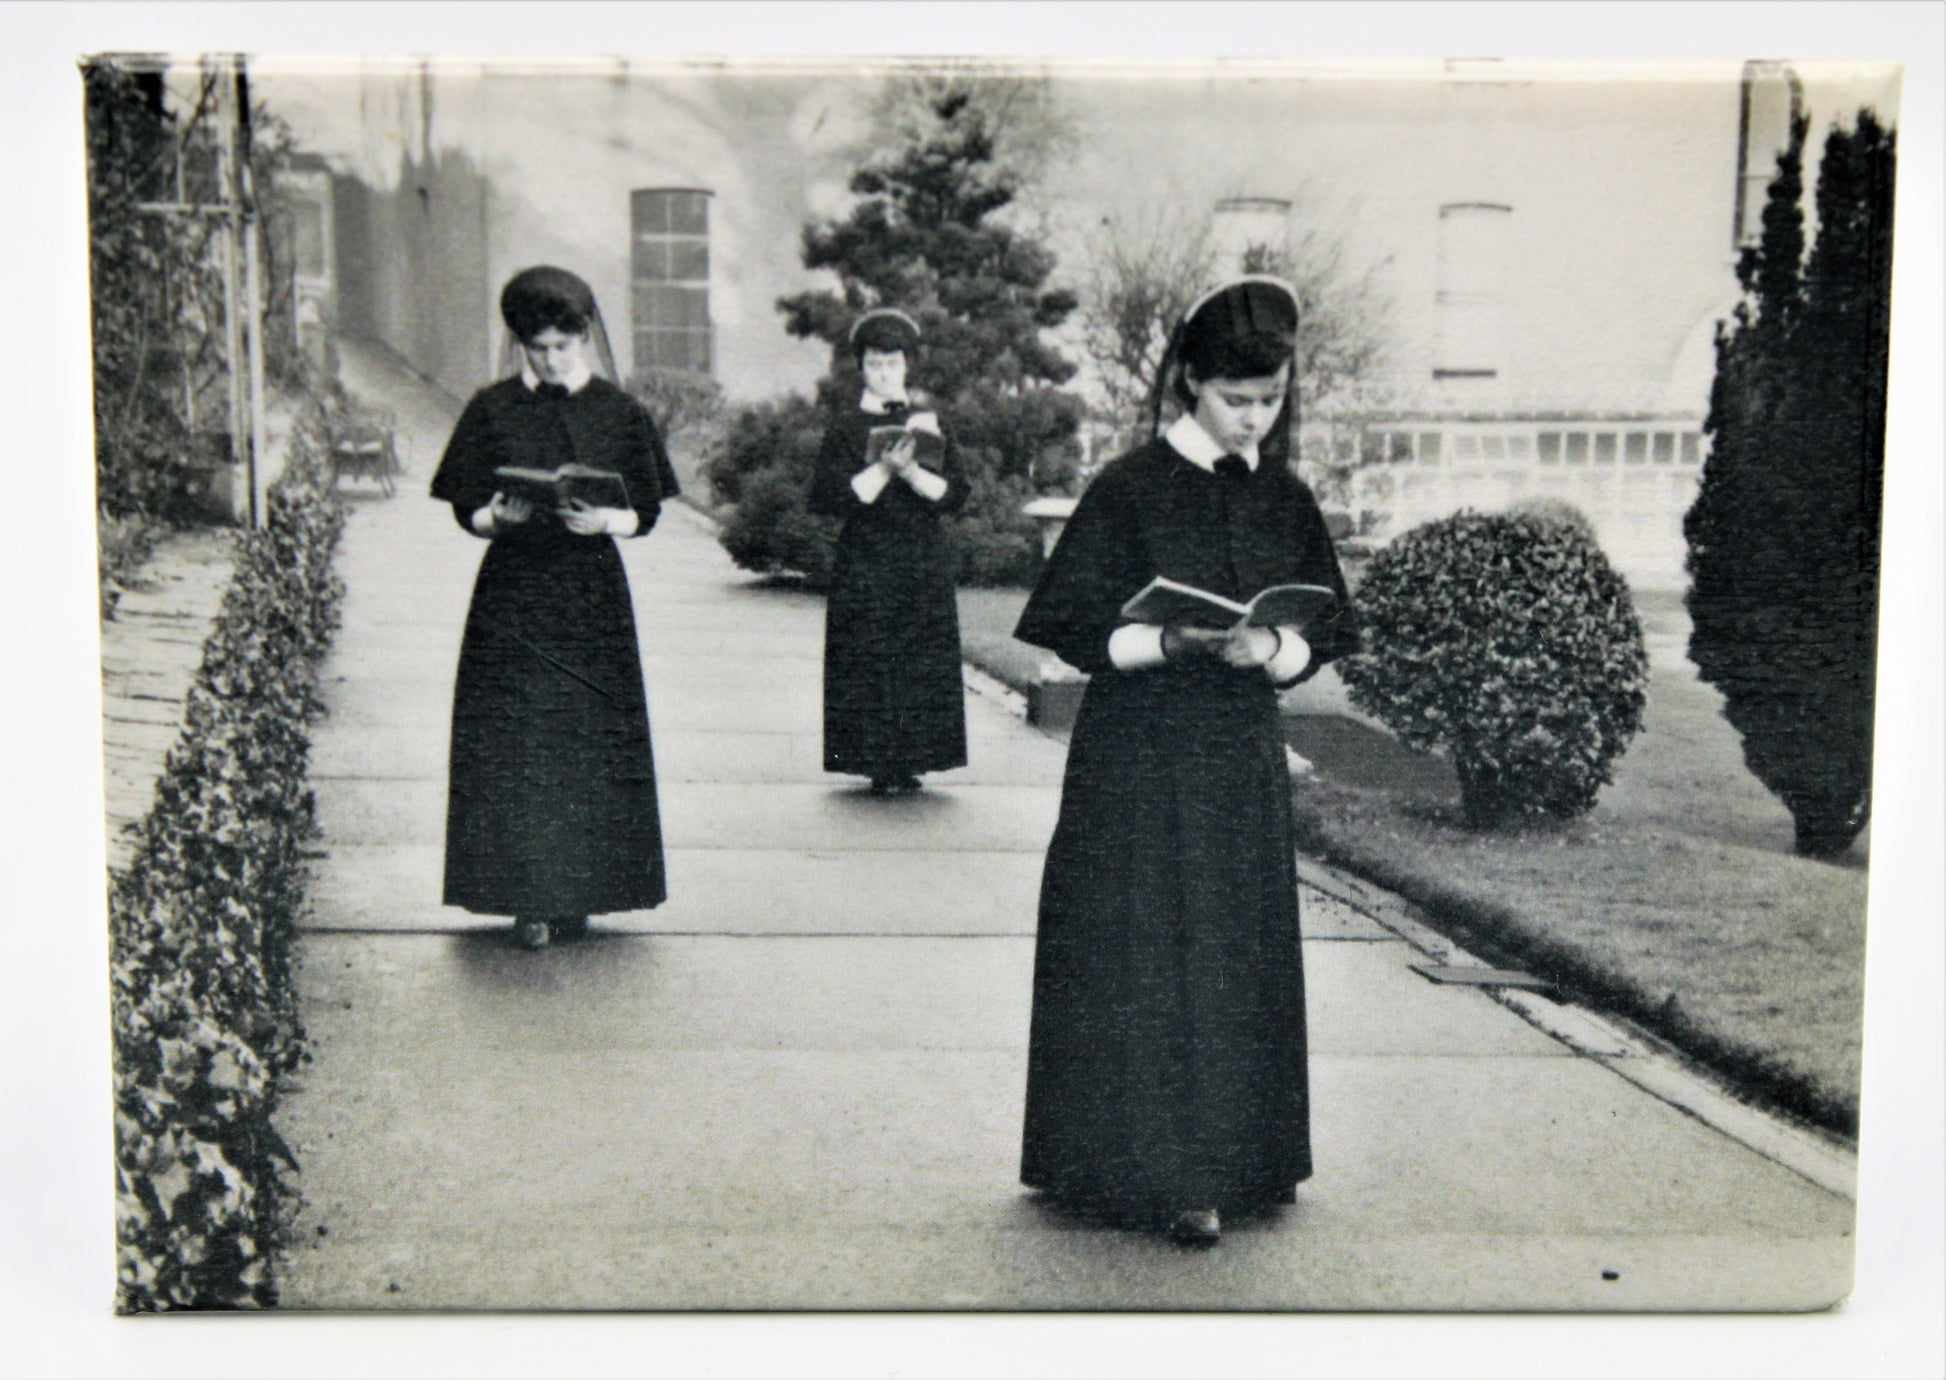 Postulants in the Garden of South Presentation Convent, 1964 Fridge Magnet